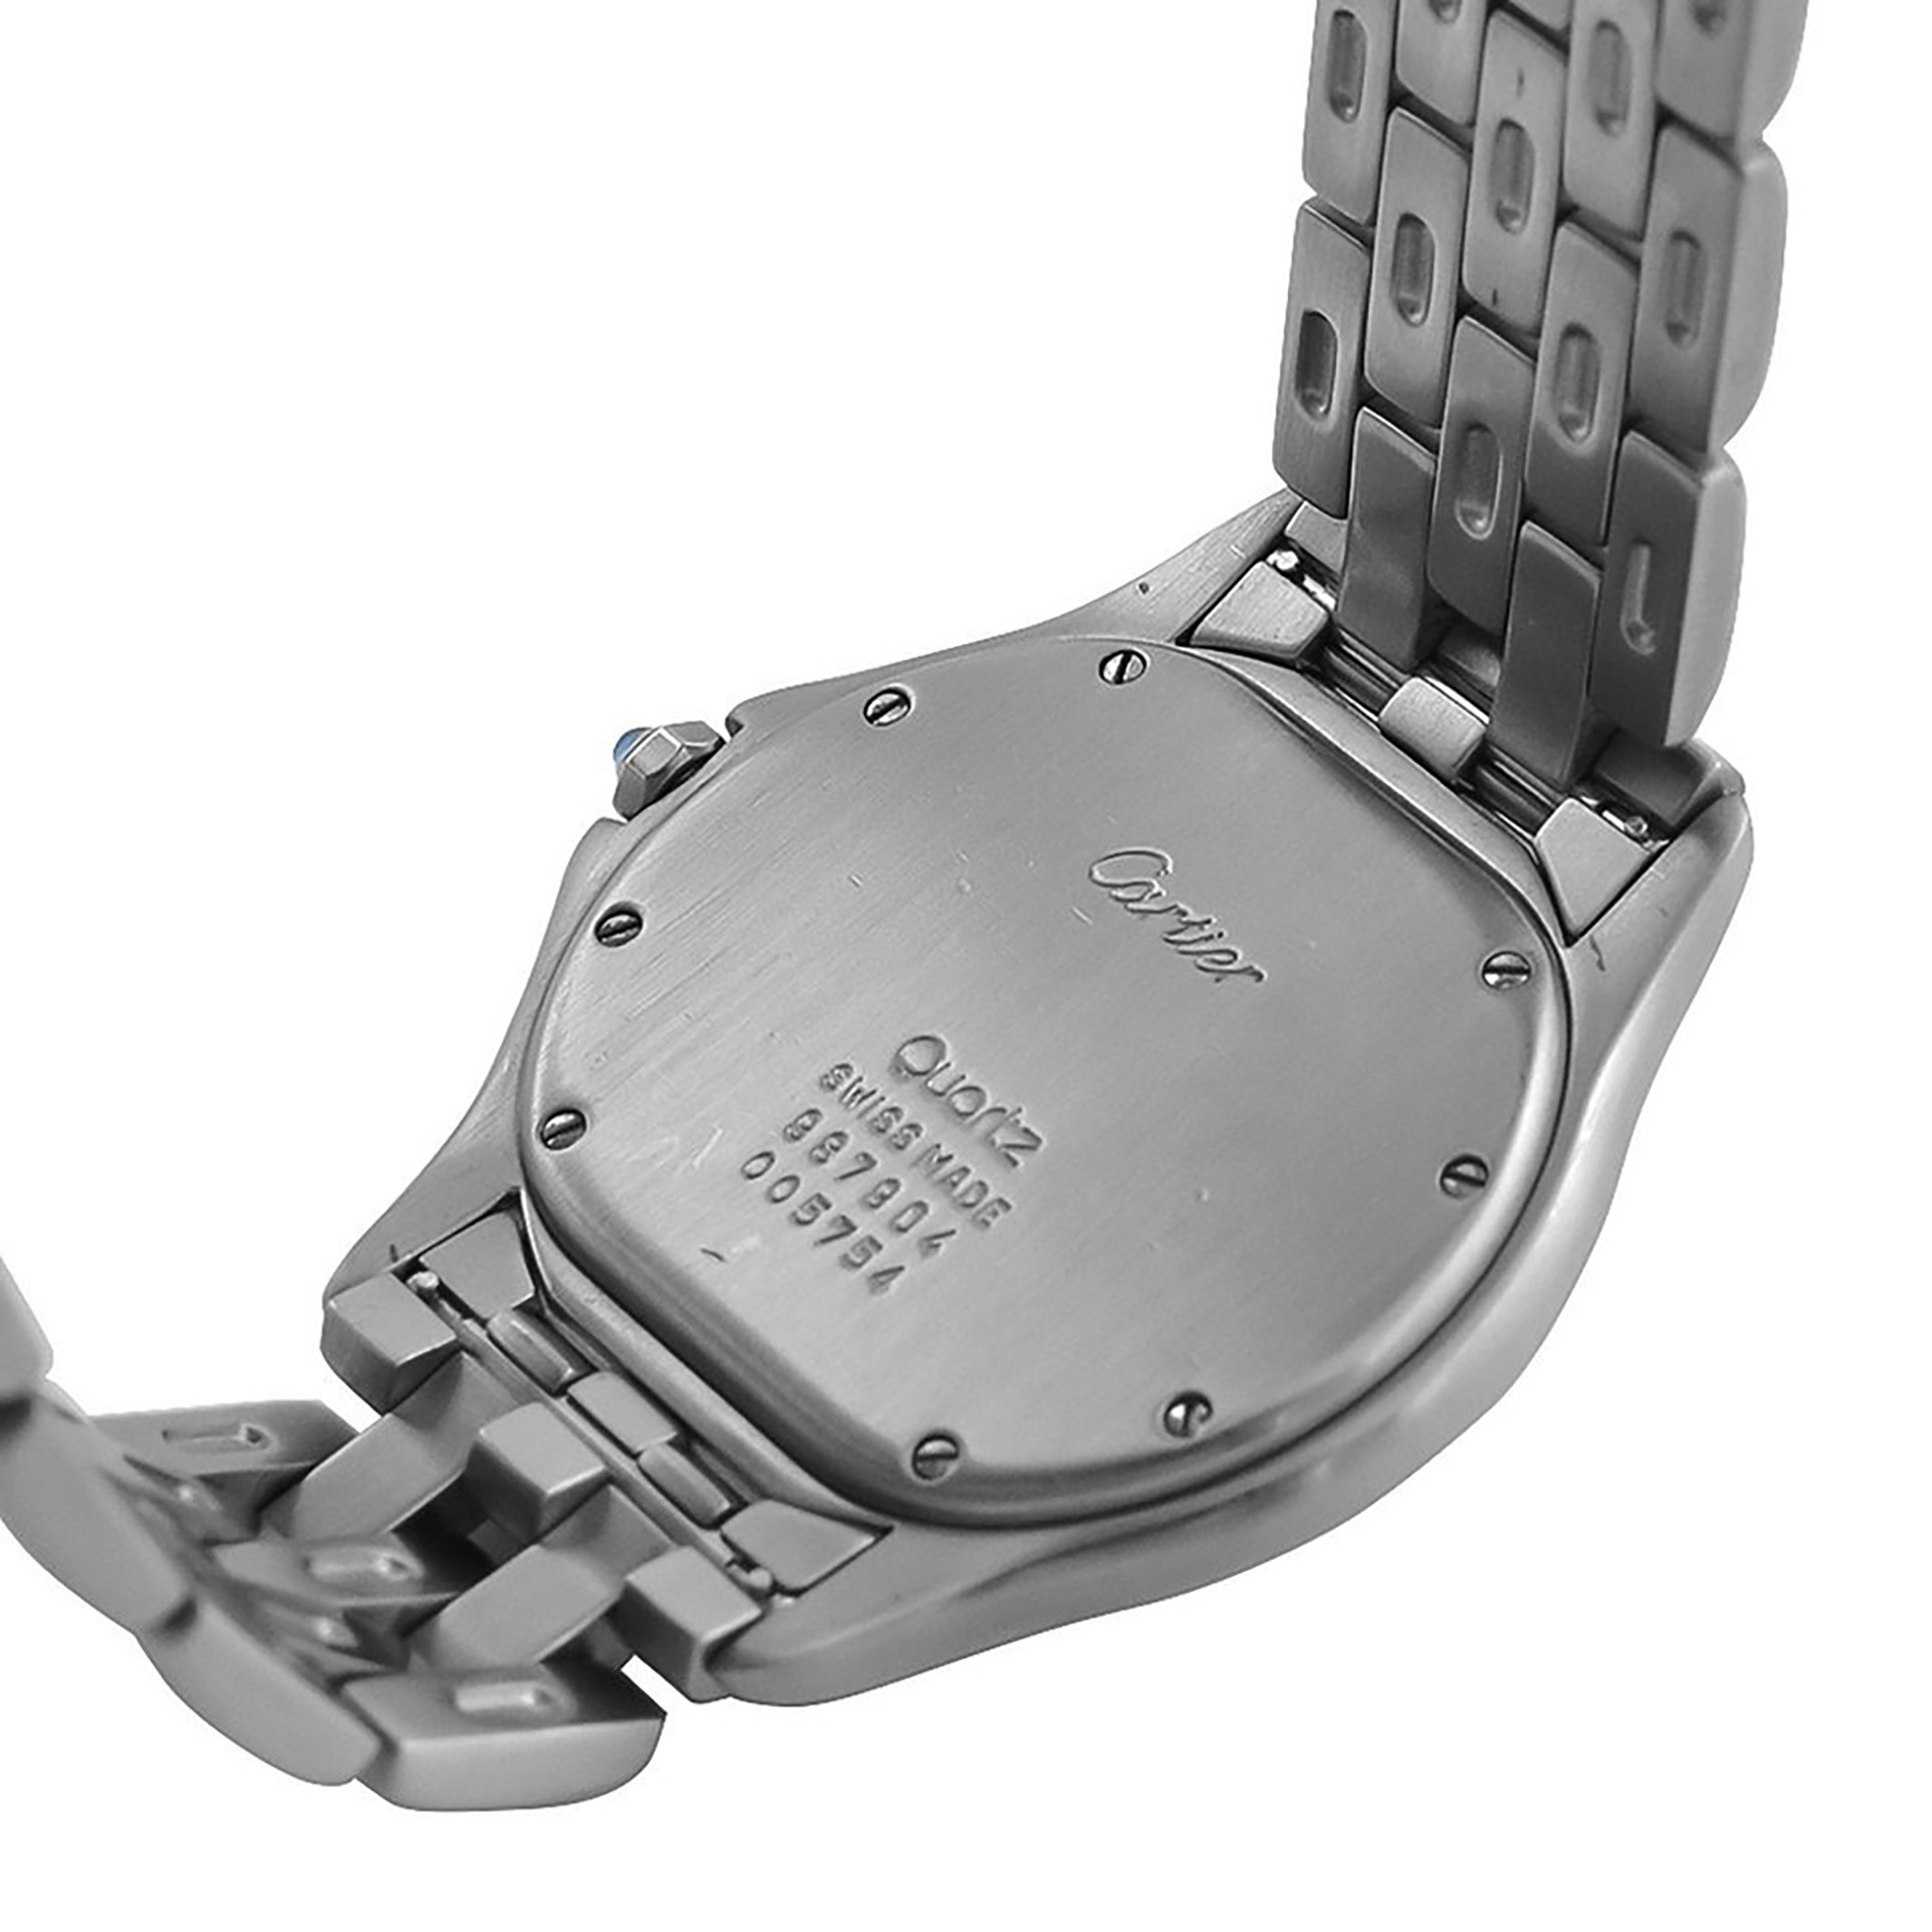 Cartier Cougar cadet wristwatch in steel white dial - Image 5 of 5